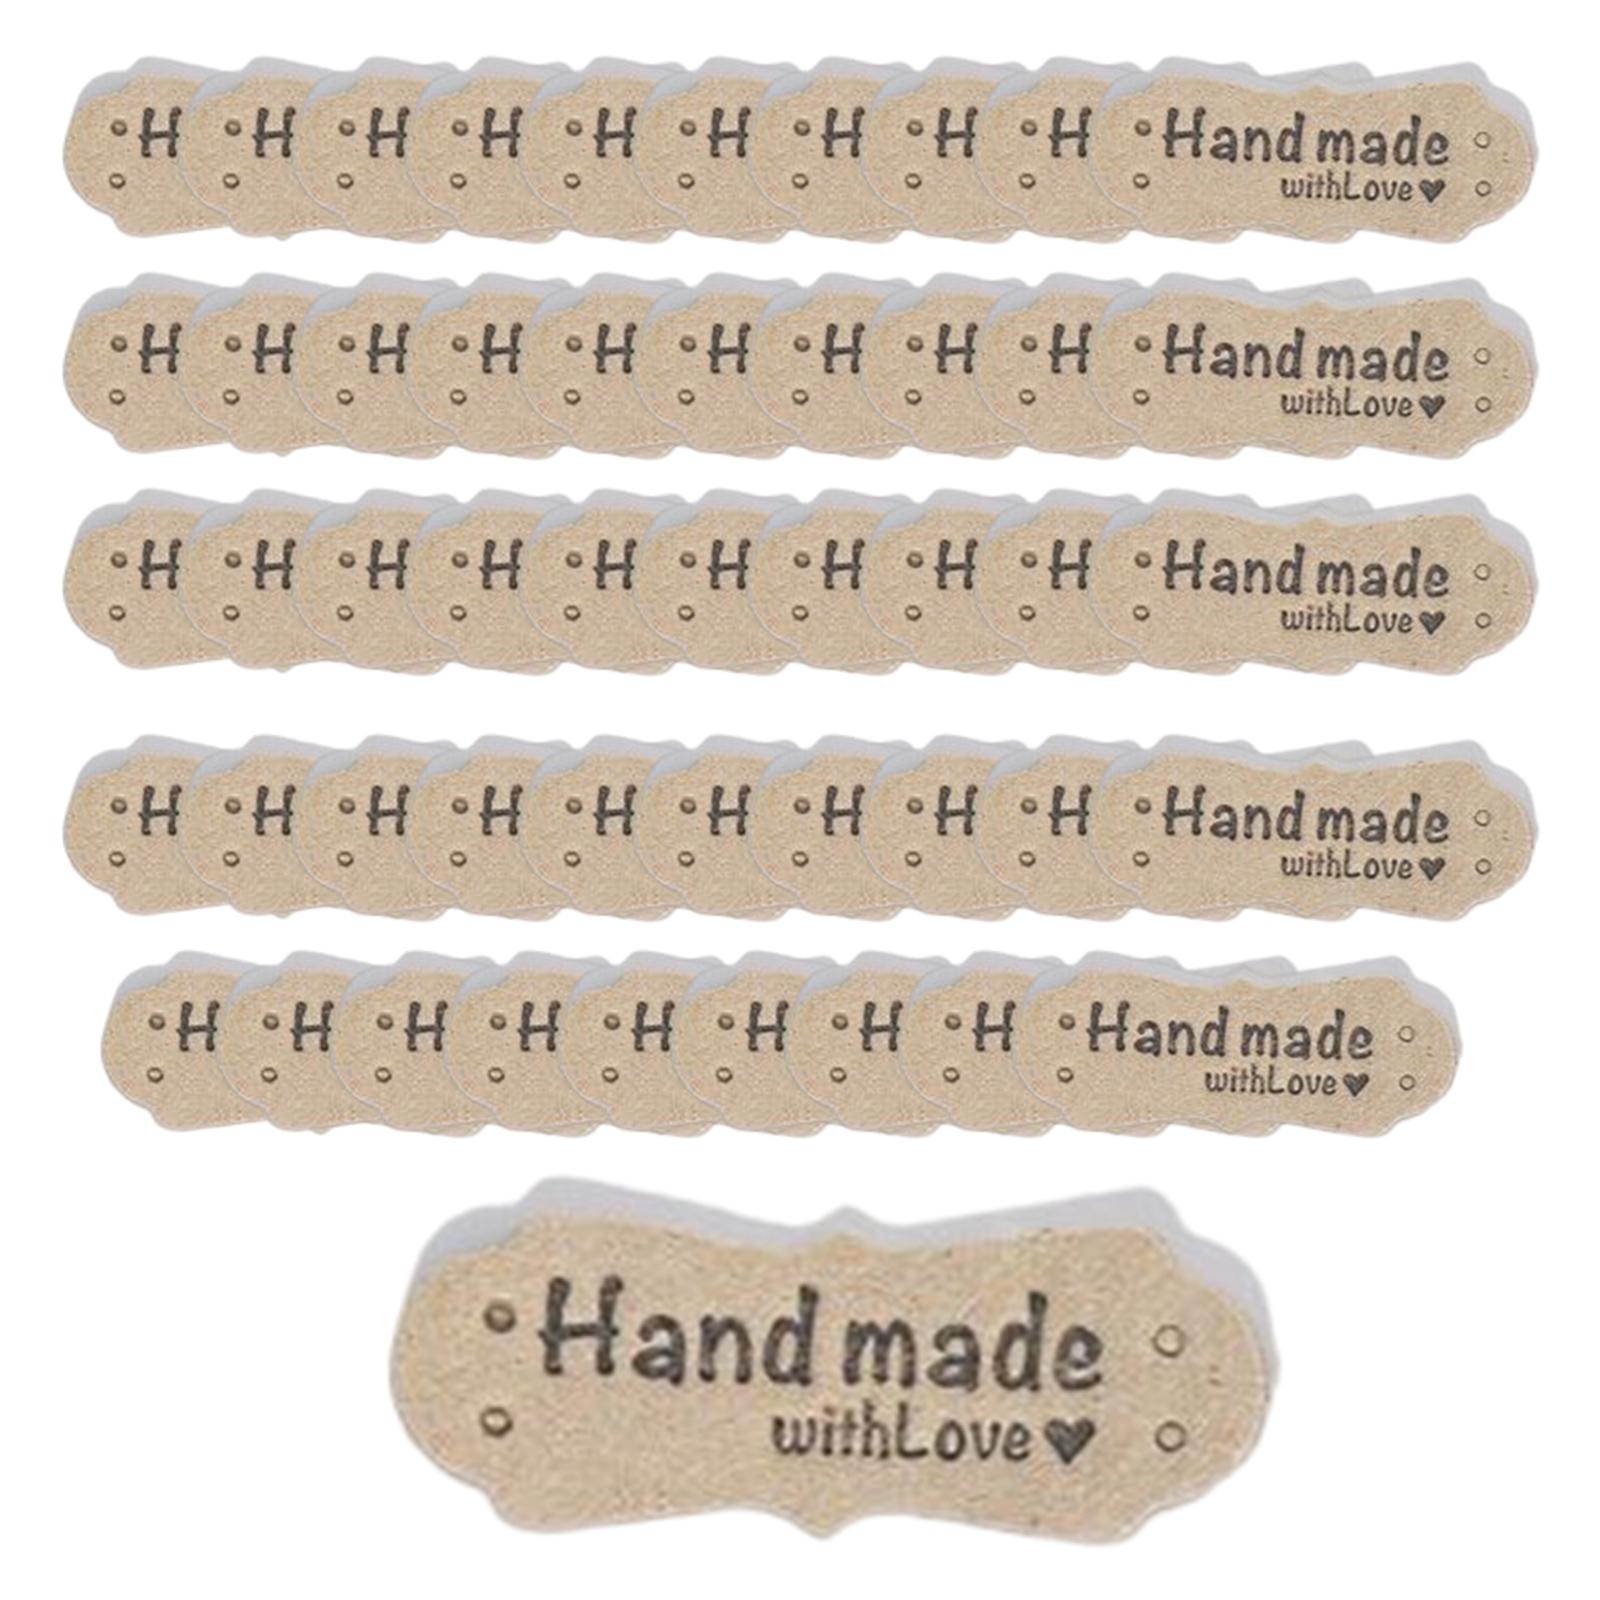 50 Pieces Handmade Tags, Decorative Mark with Holes DIY Crafts  Embellishment Labels for Sewing Clothes Scarves Gloves Purse Green